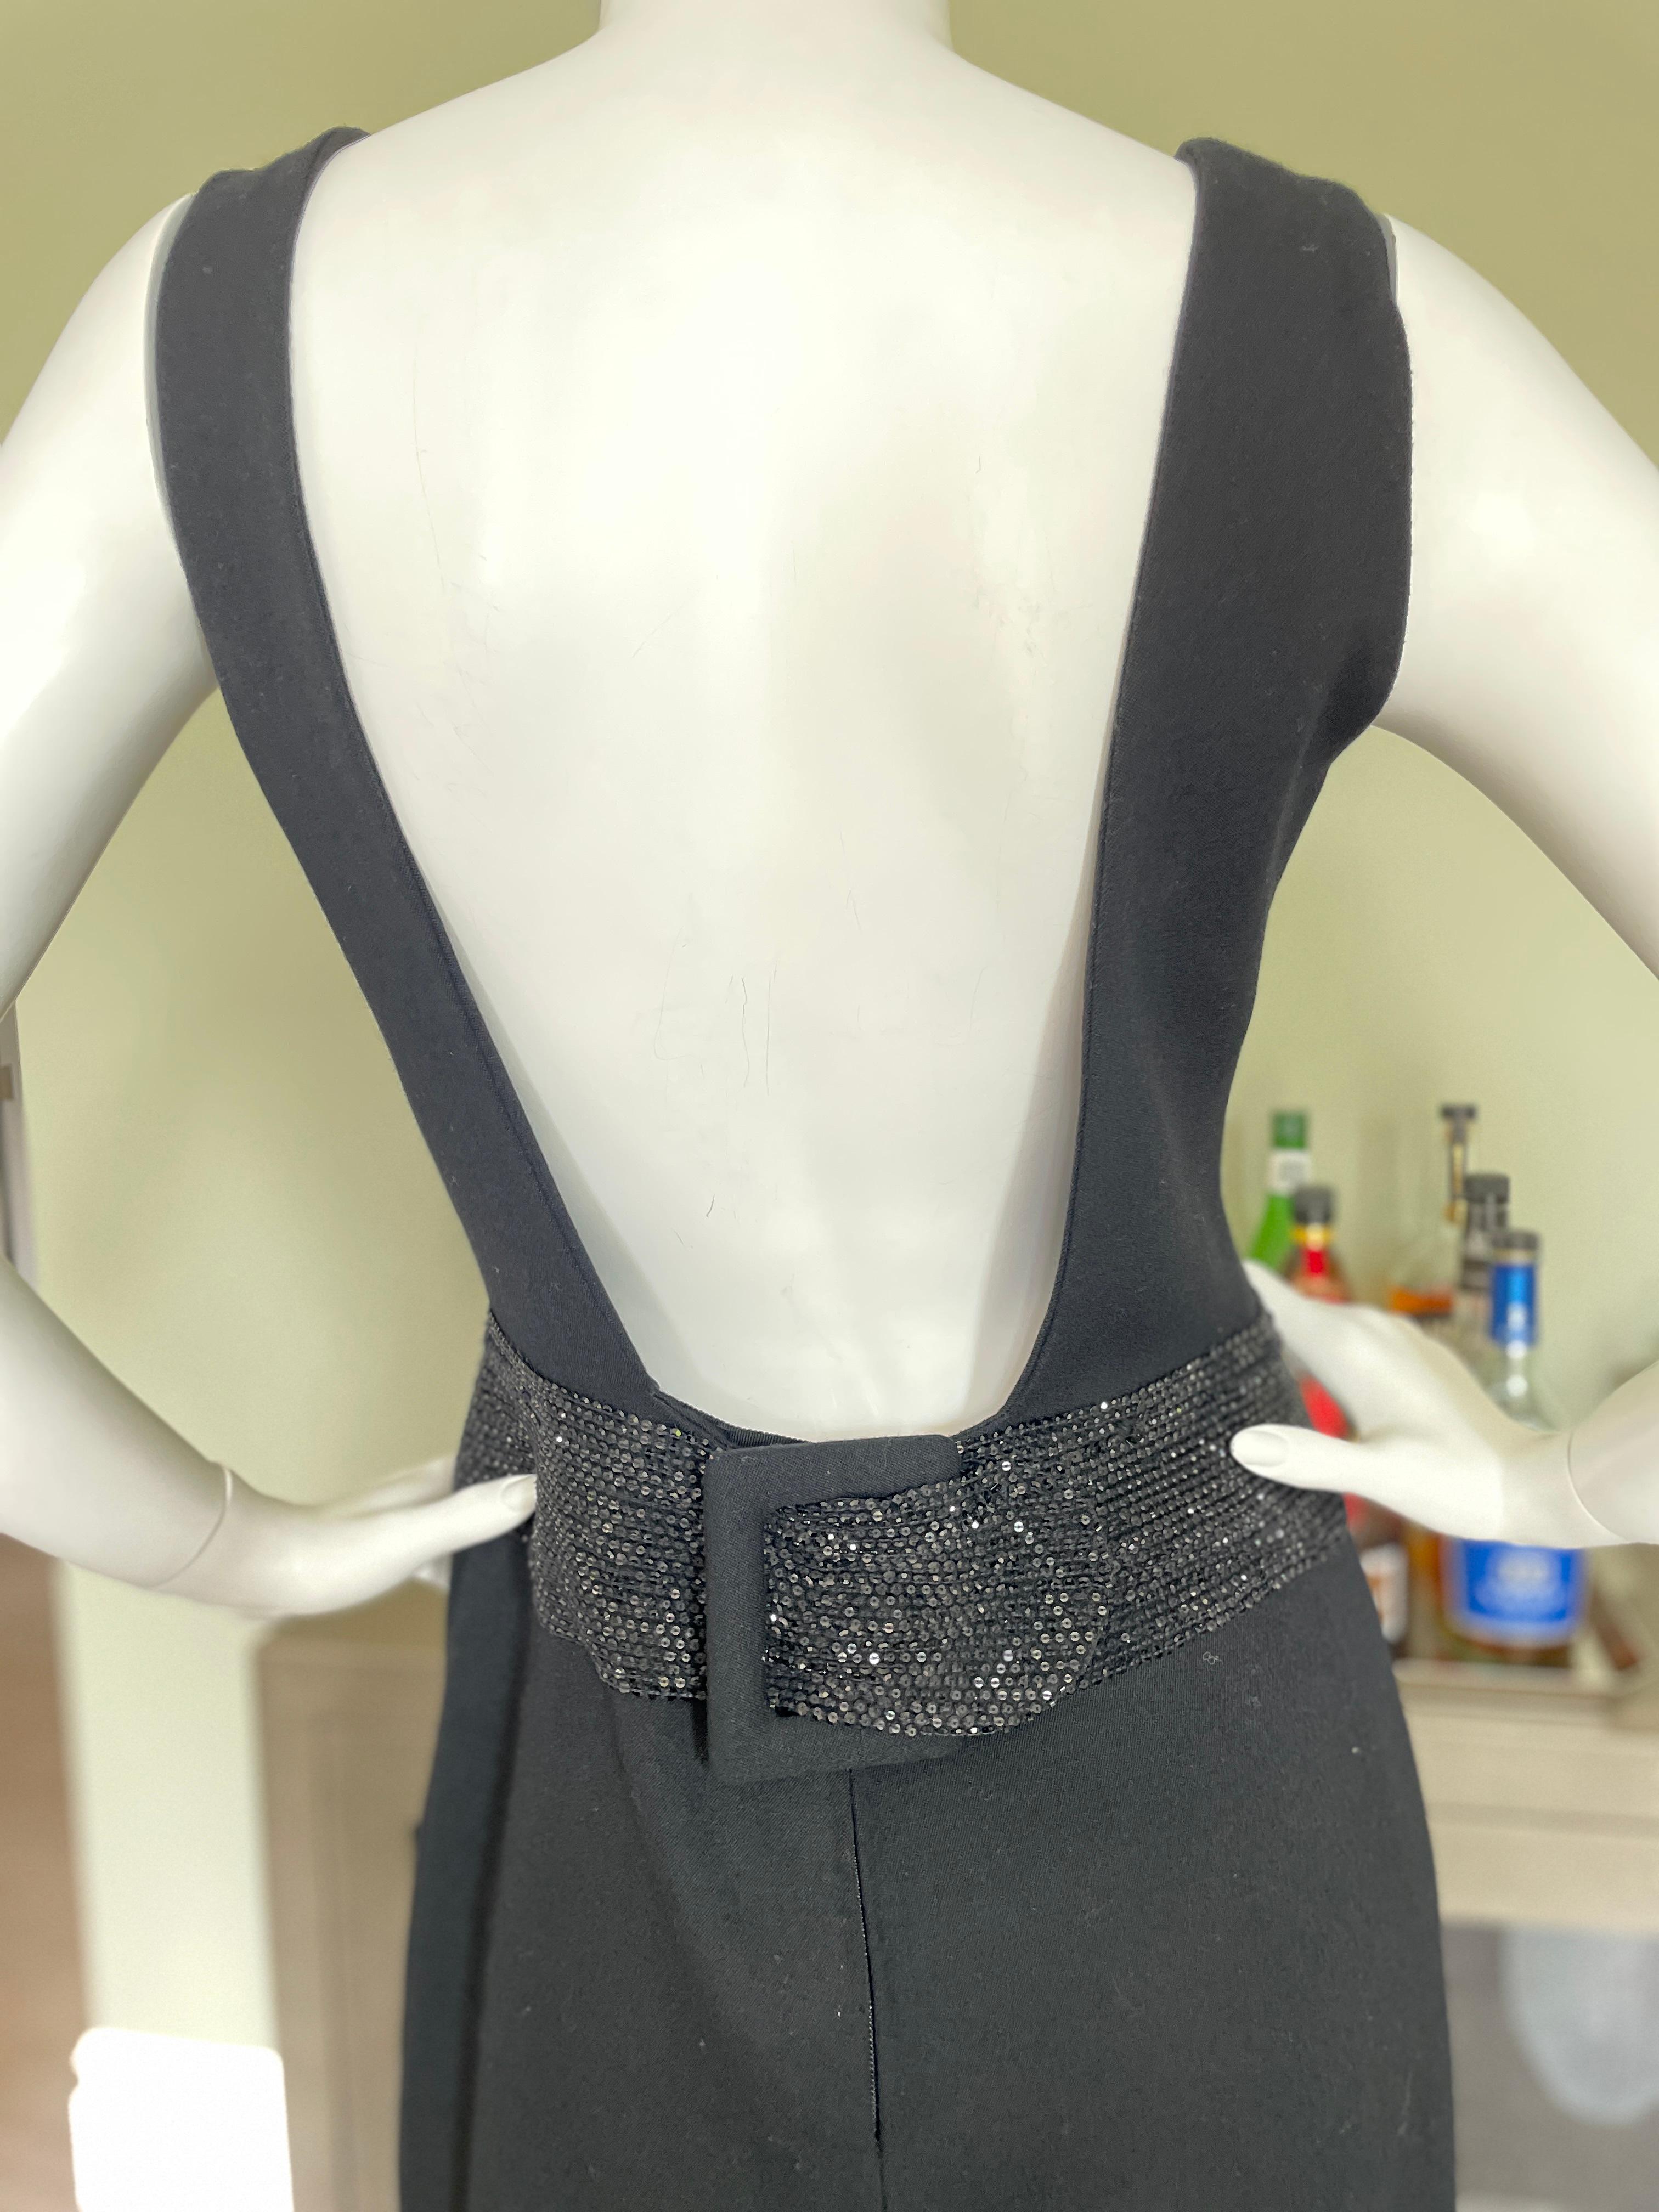 Women's Carolyne Roehm 1980's Black Evening Dress with Plunging Back and Jeweled Waist For Sale